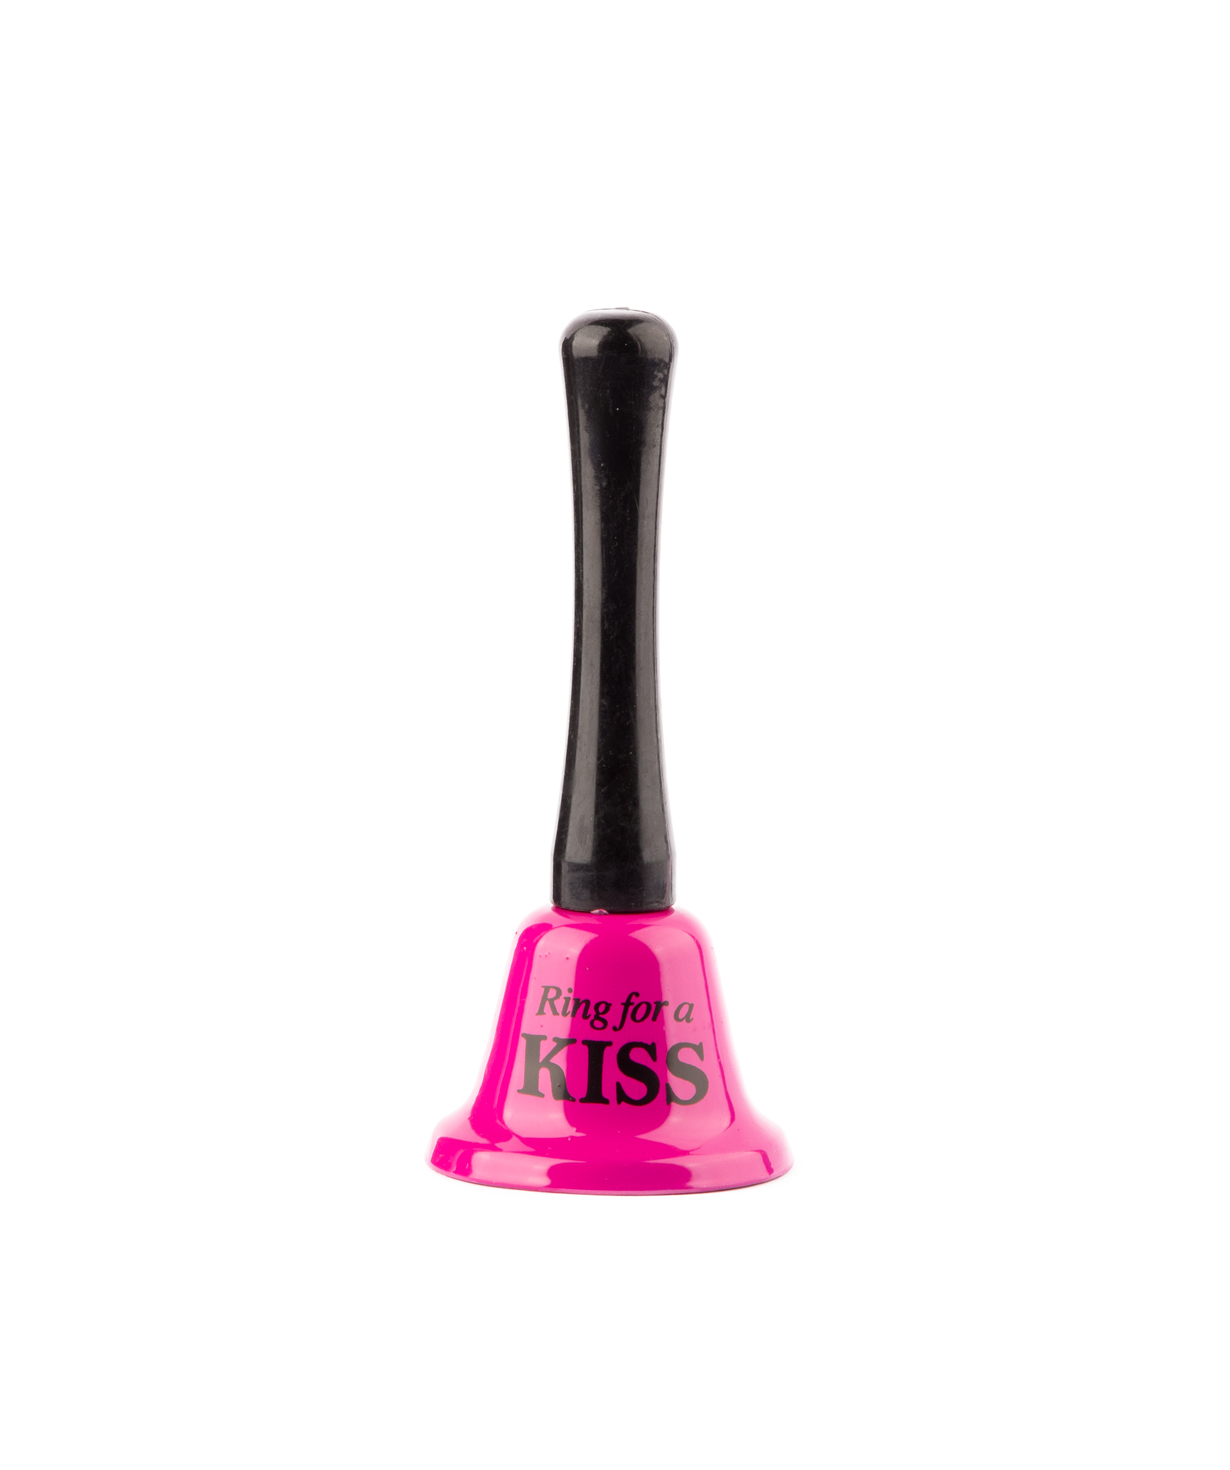 Table bell `Jpit.am` Ring for a kiss